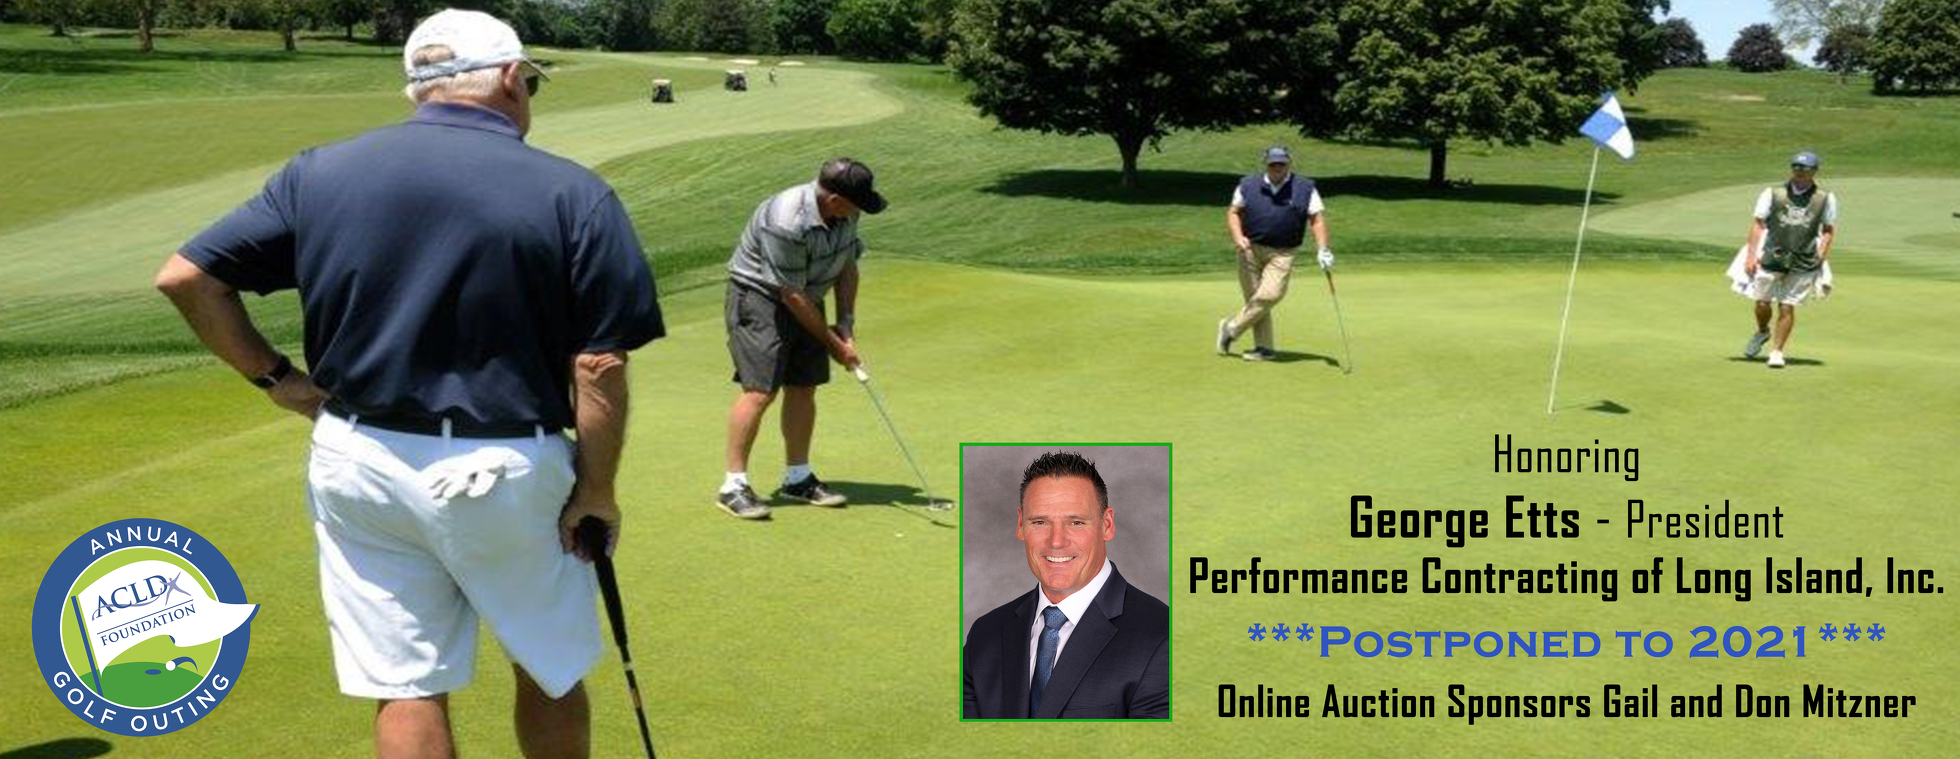 ACLD Golf Outing Online Auction